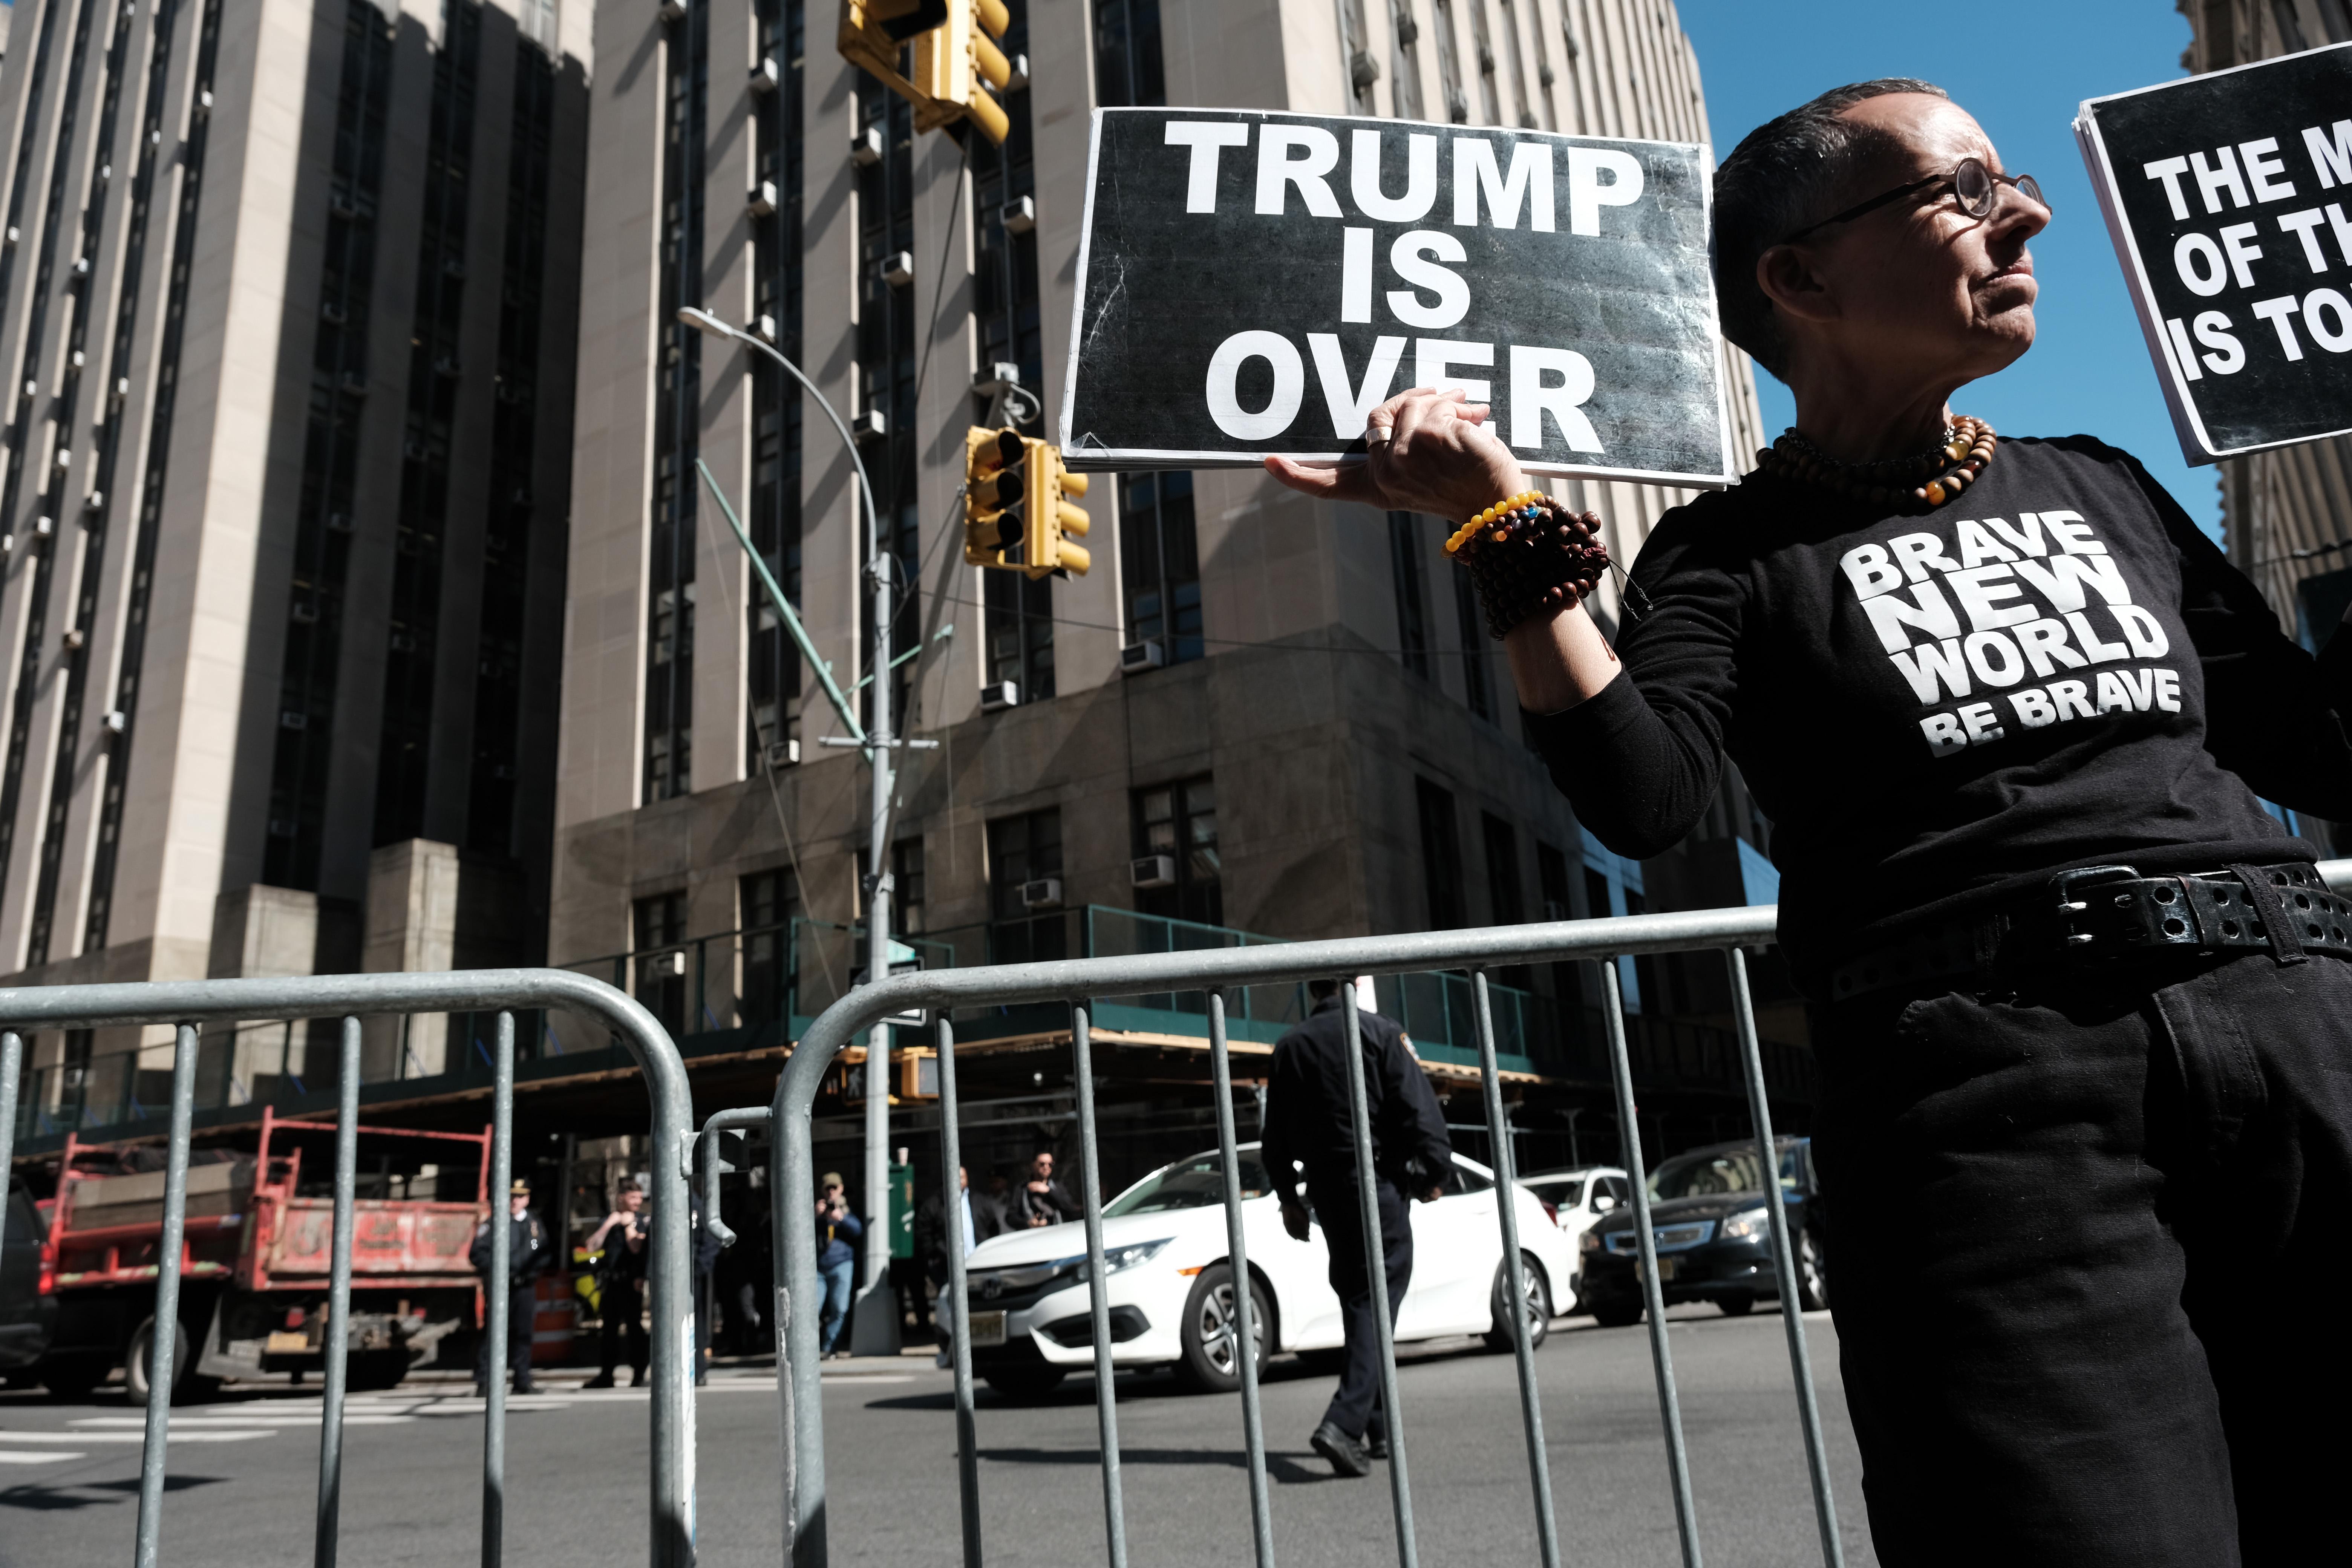 A person wearing all black holds up a sign that says, "TRUMP IS OVER" on a Manhattan street corner.